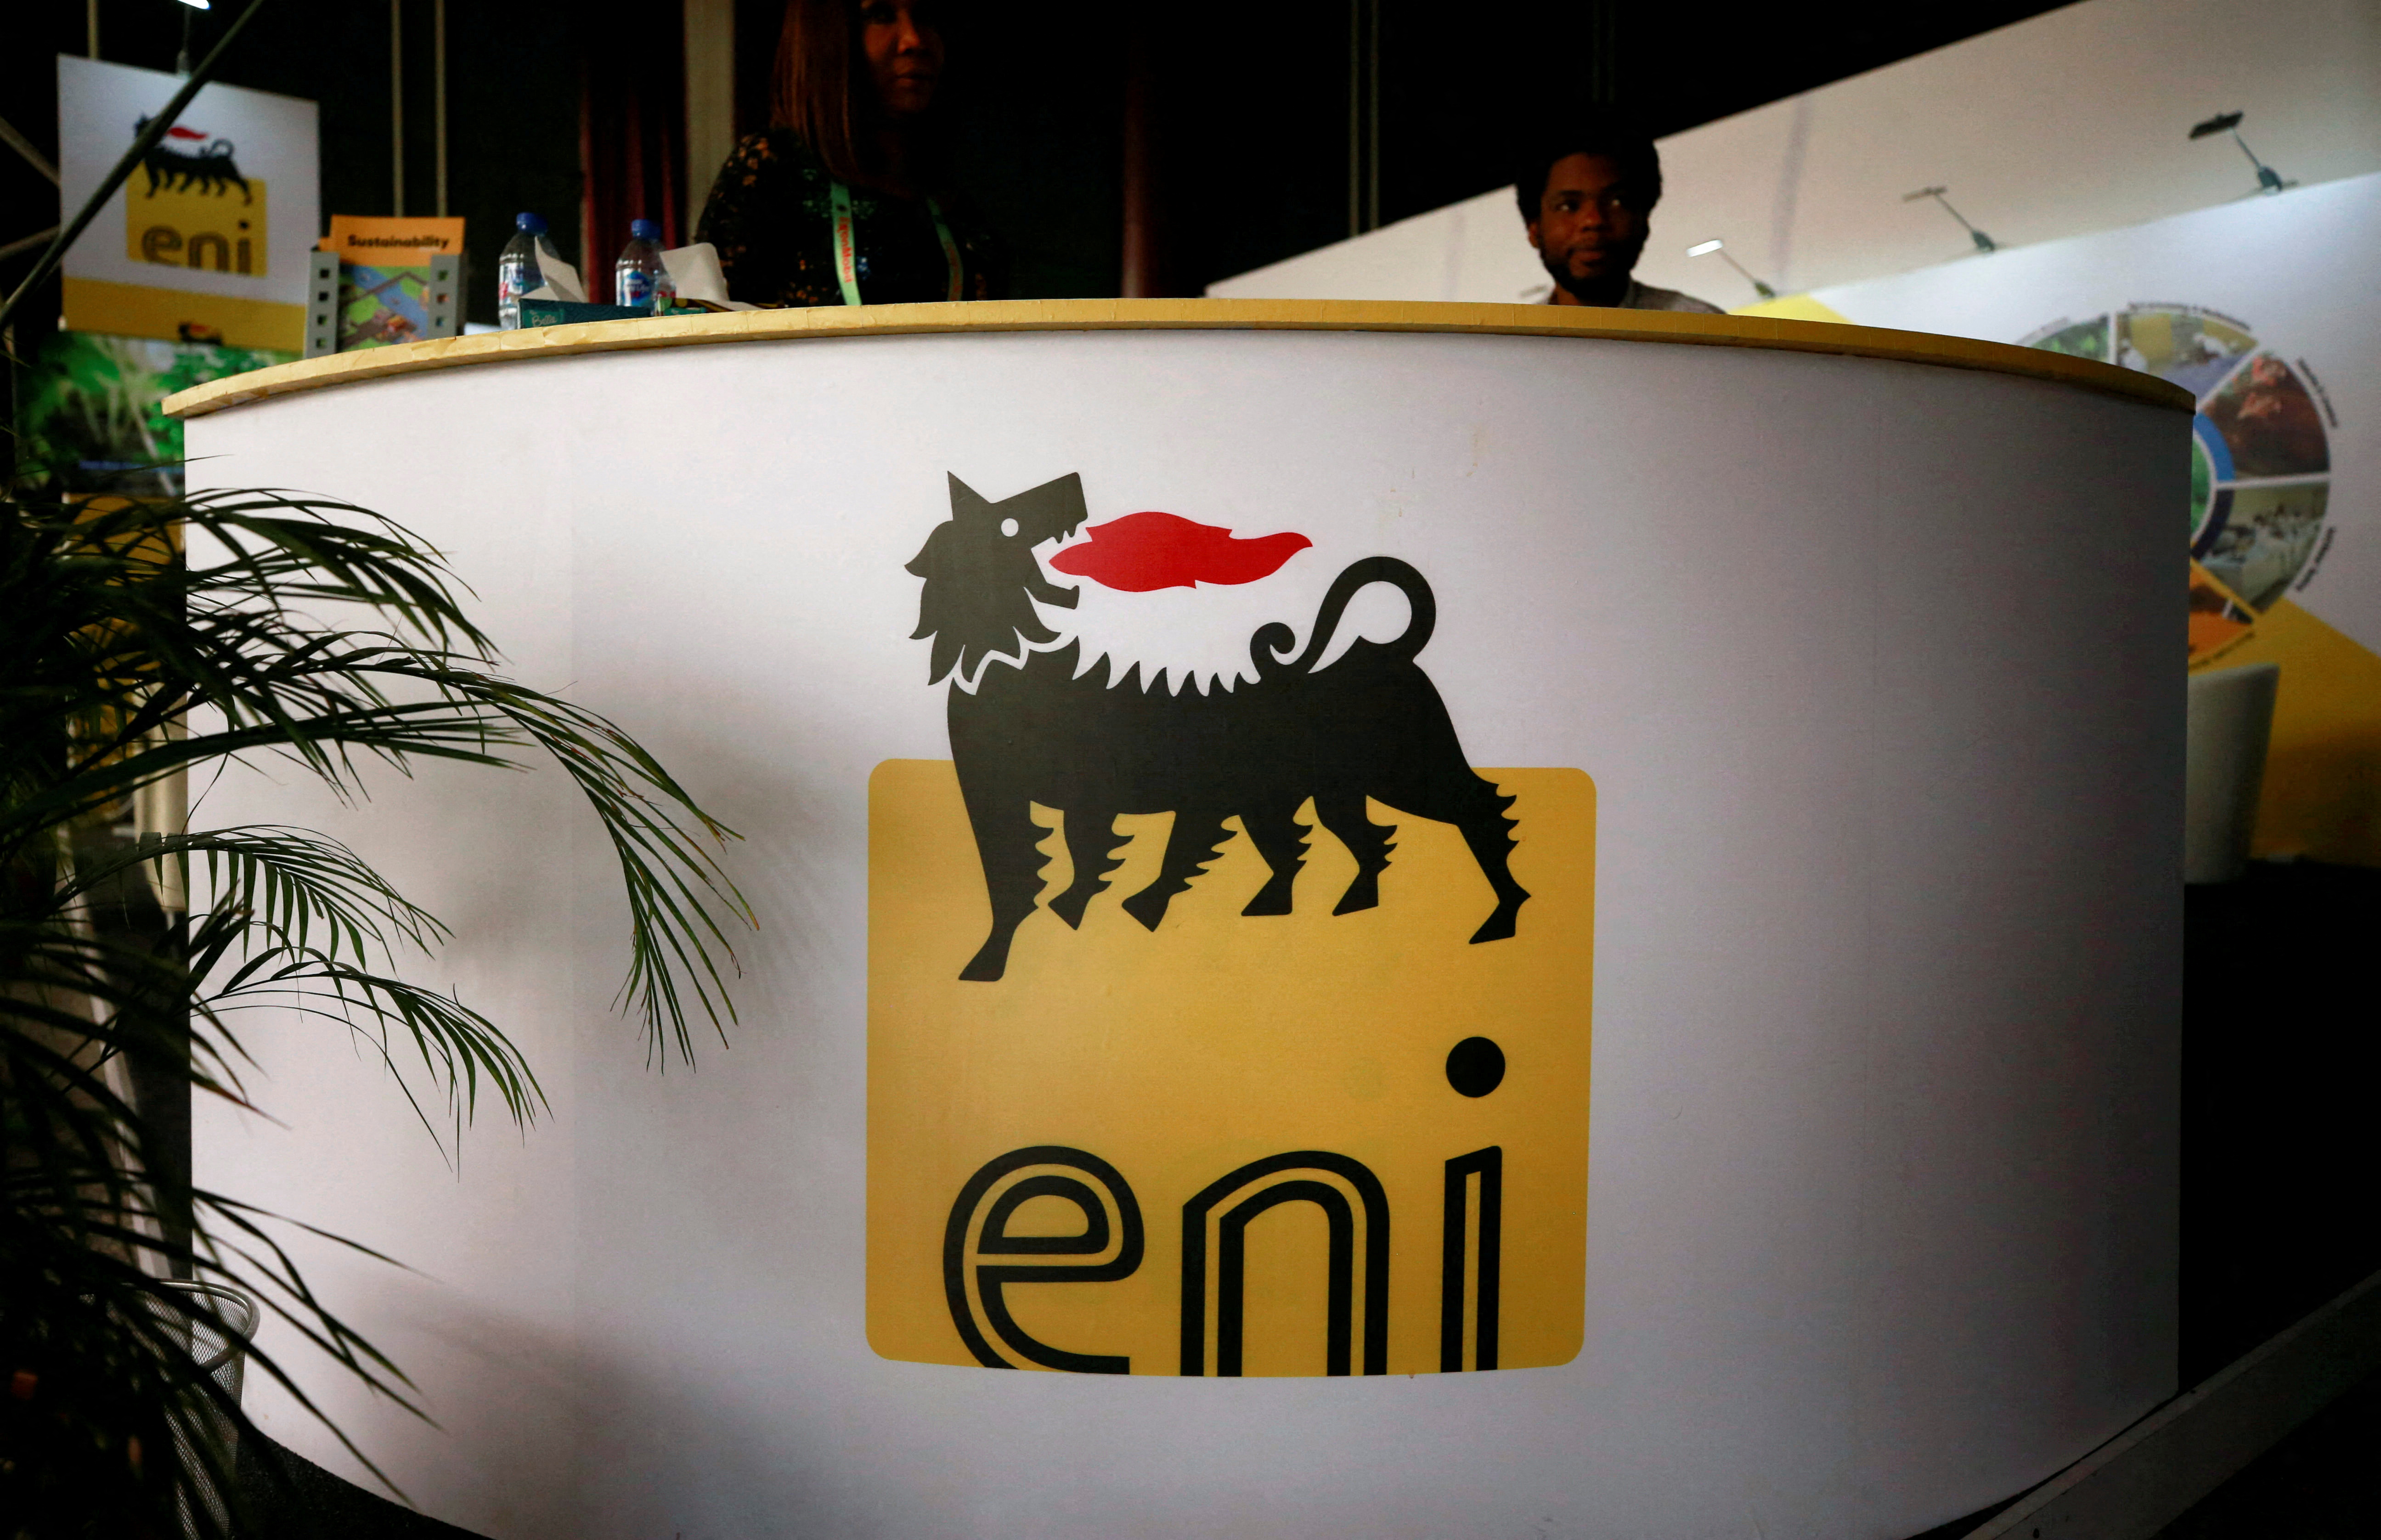 The logo of Italian energy company Eni is seen on a booth stand during the Nigeria International Petroleum Summit in Abuja, Nigeria February 11, 2020. REUTERS/Afolabi Sotunde/File Photo